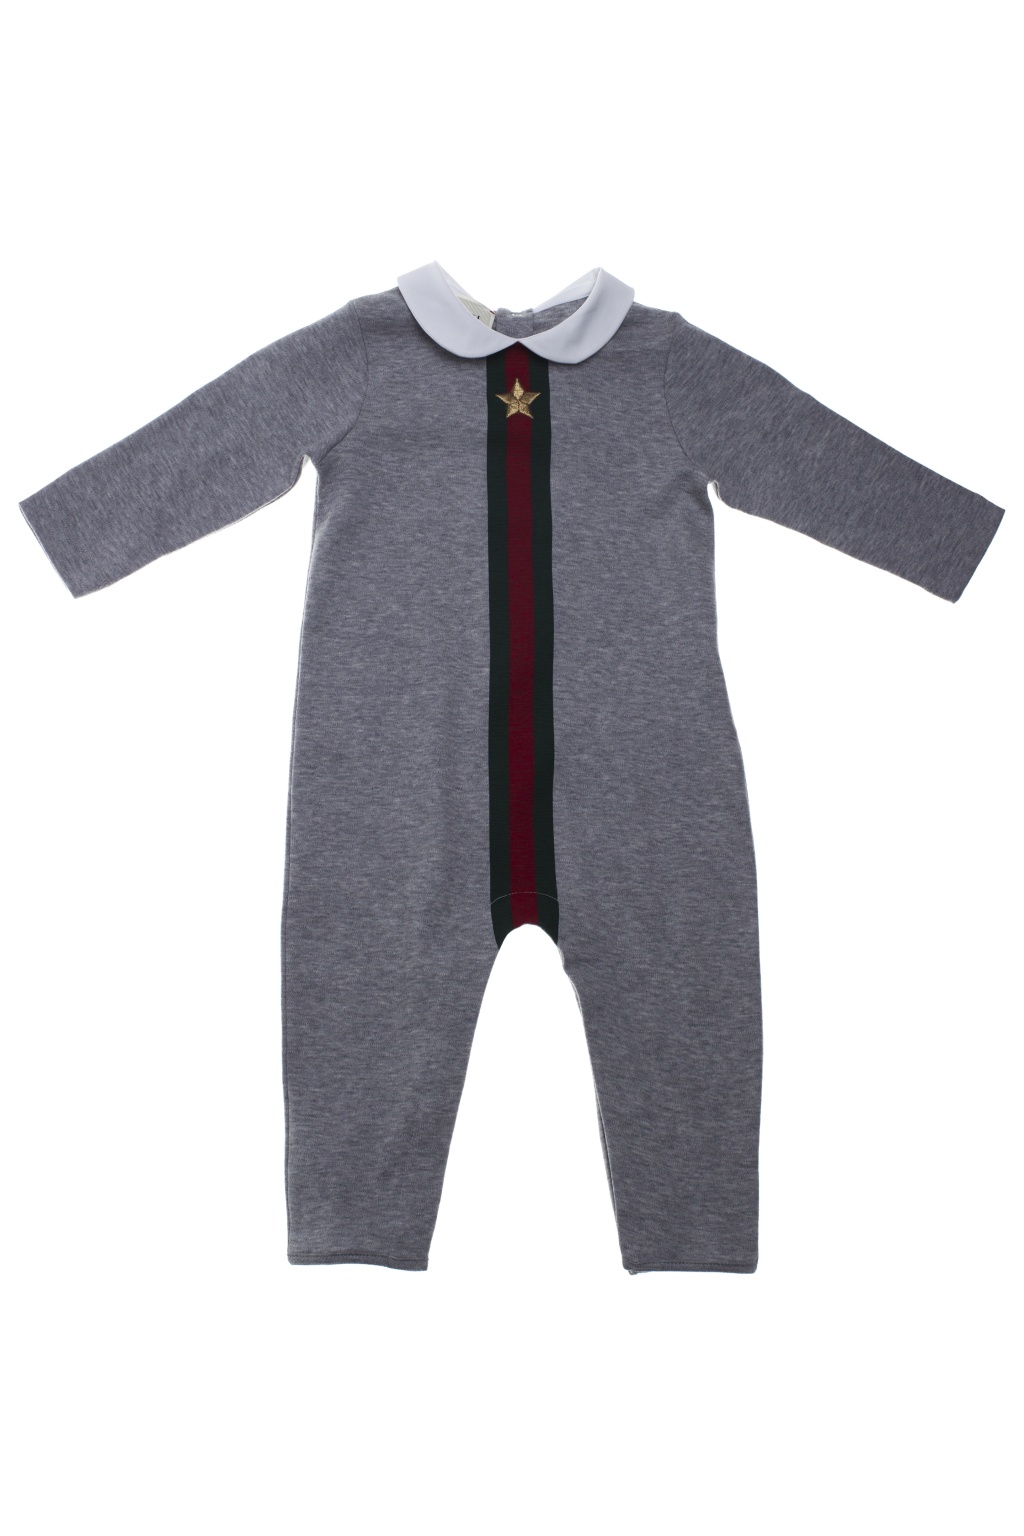 Gucci Kids Jumpsuit with logo, Kids's Baby (0-36 months)